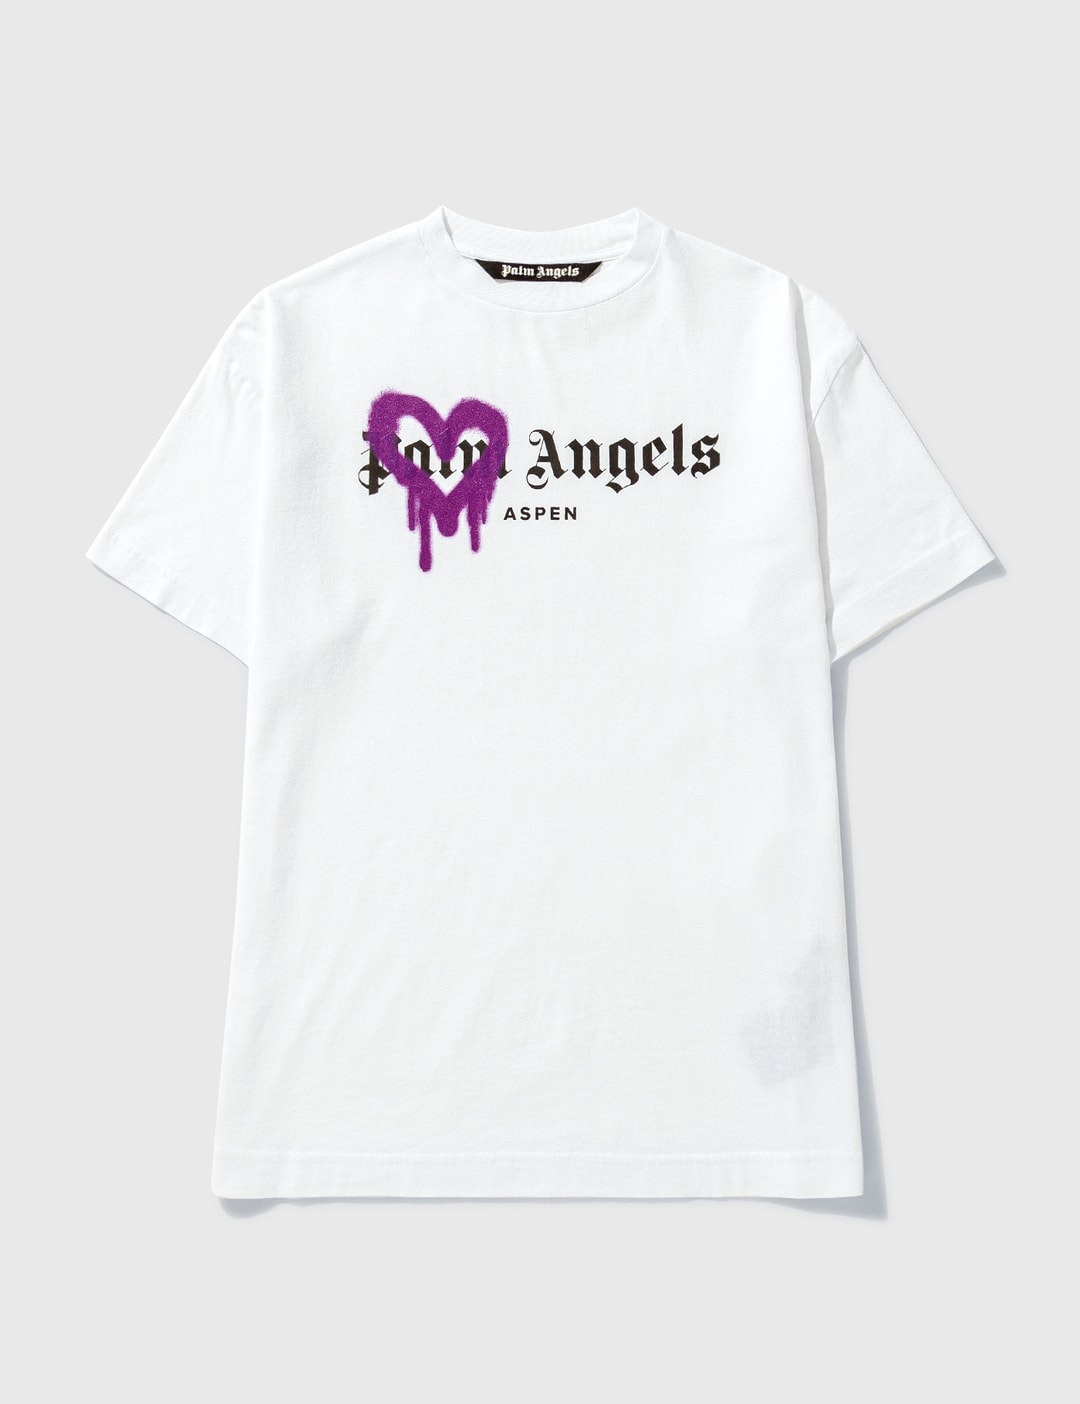 Lee know palm angels spray heart t-shirt, hoodie, sweater, long